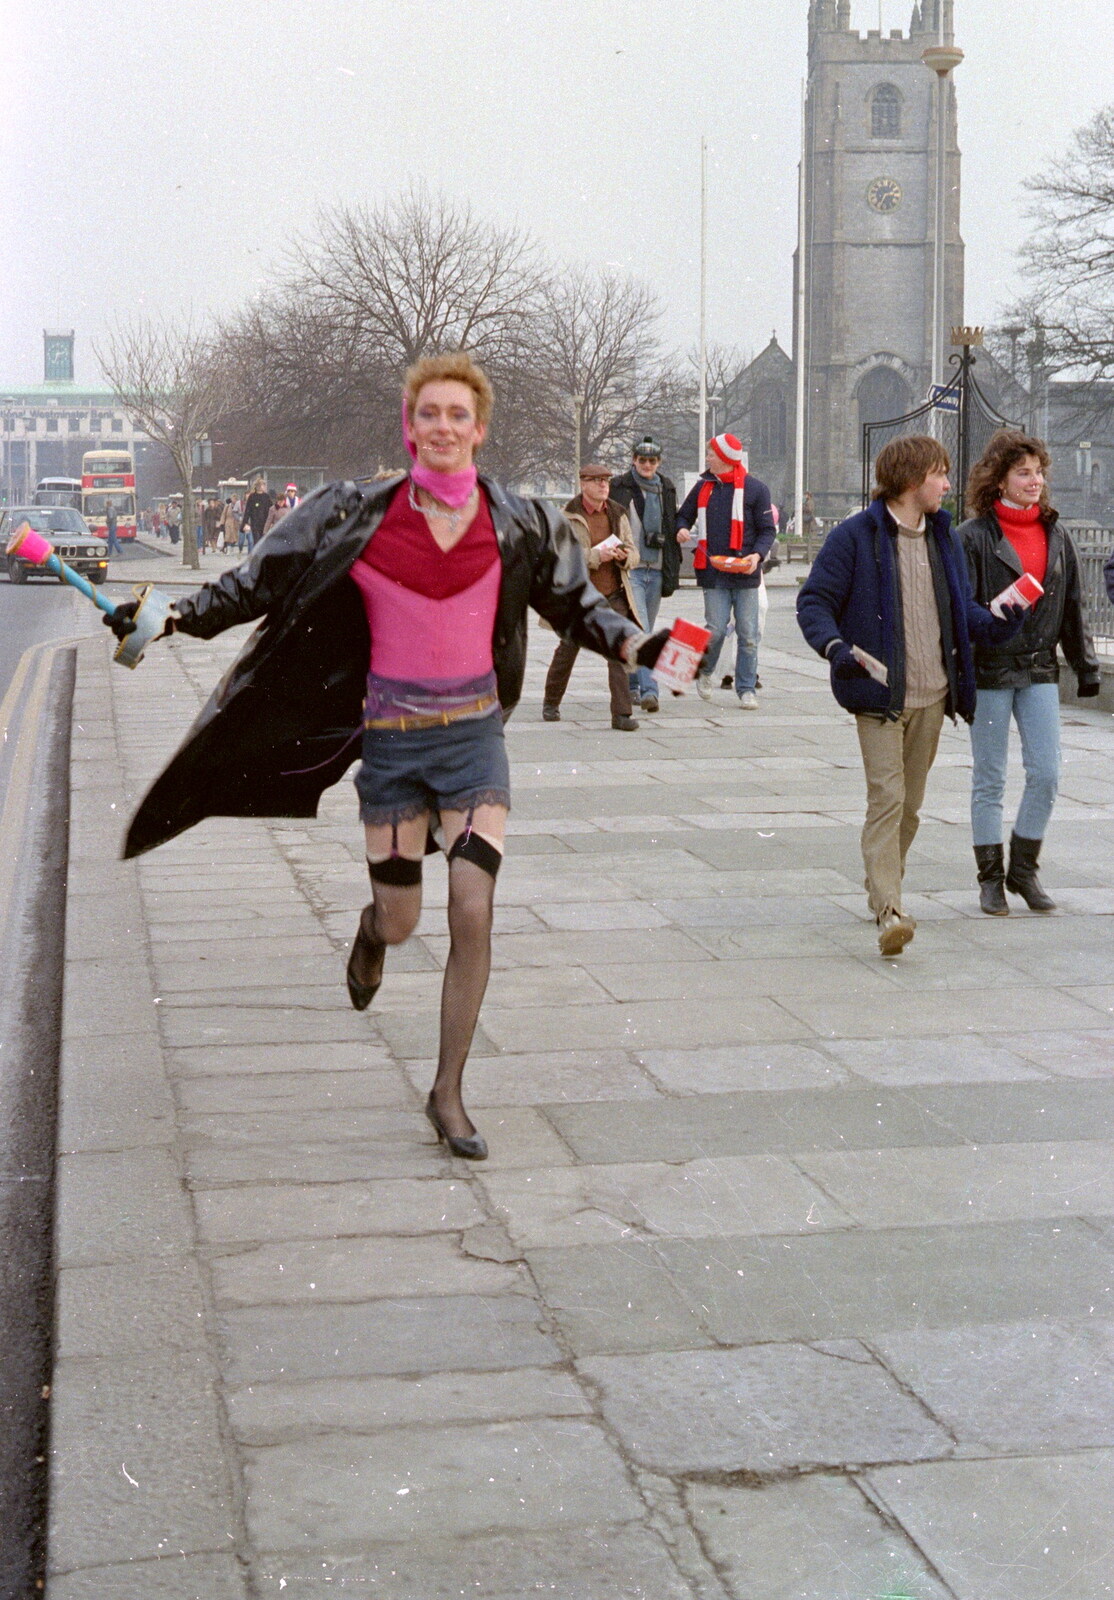 A BABS student legs it down Royal Parade from Uni: PPSU "Jazz" RAG Street Parade, Plymouth, Devon - 17th February 1986